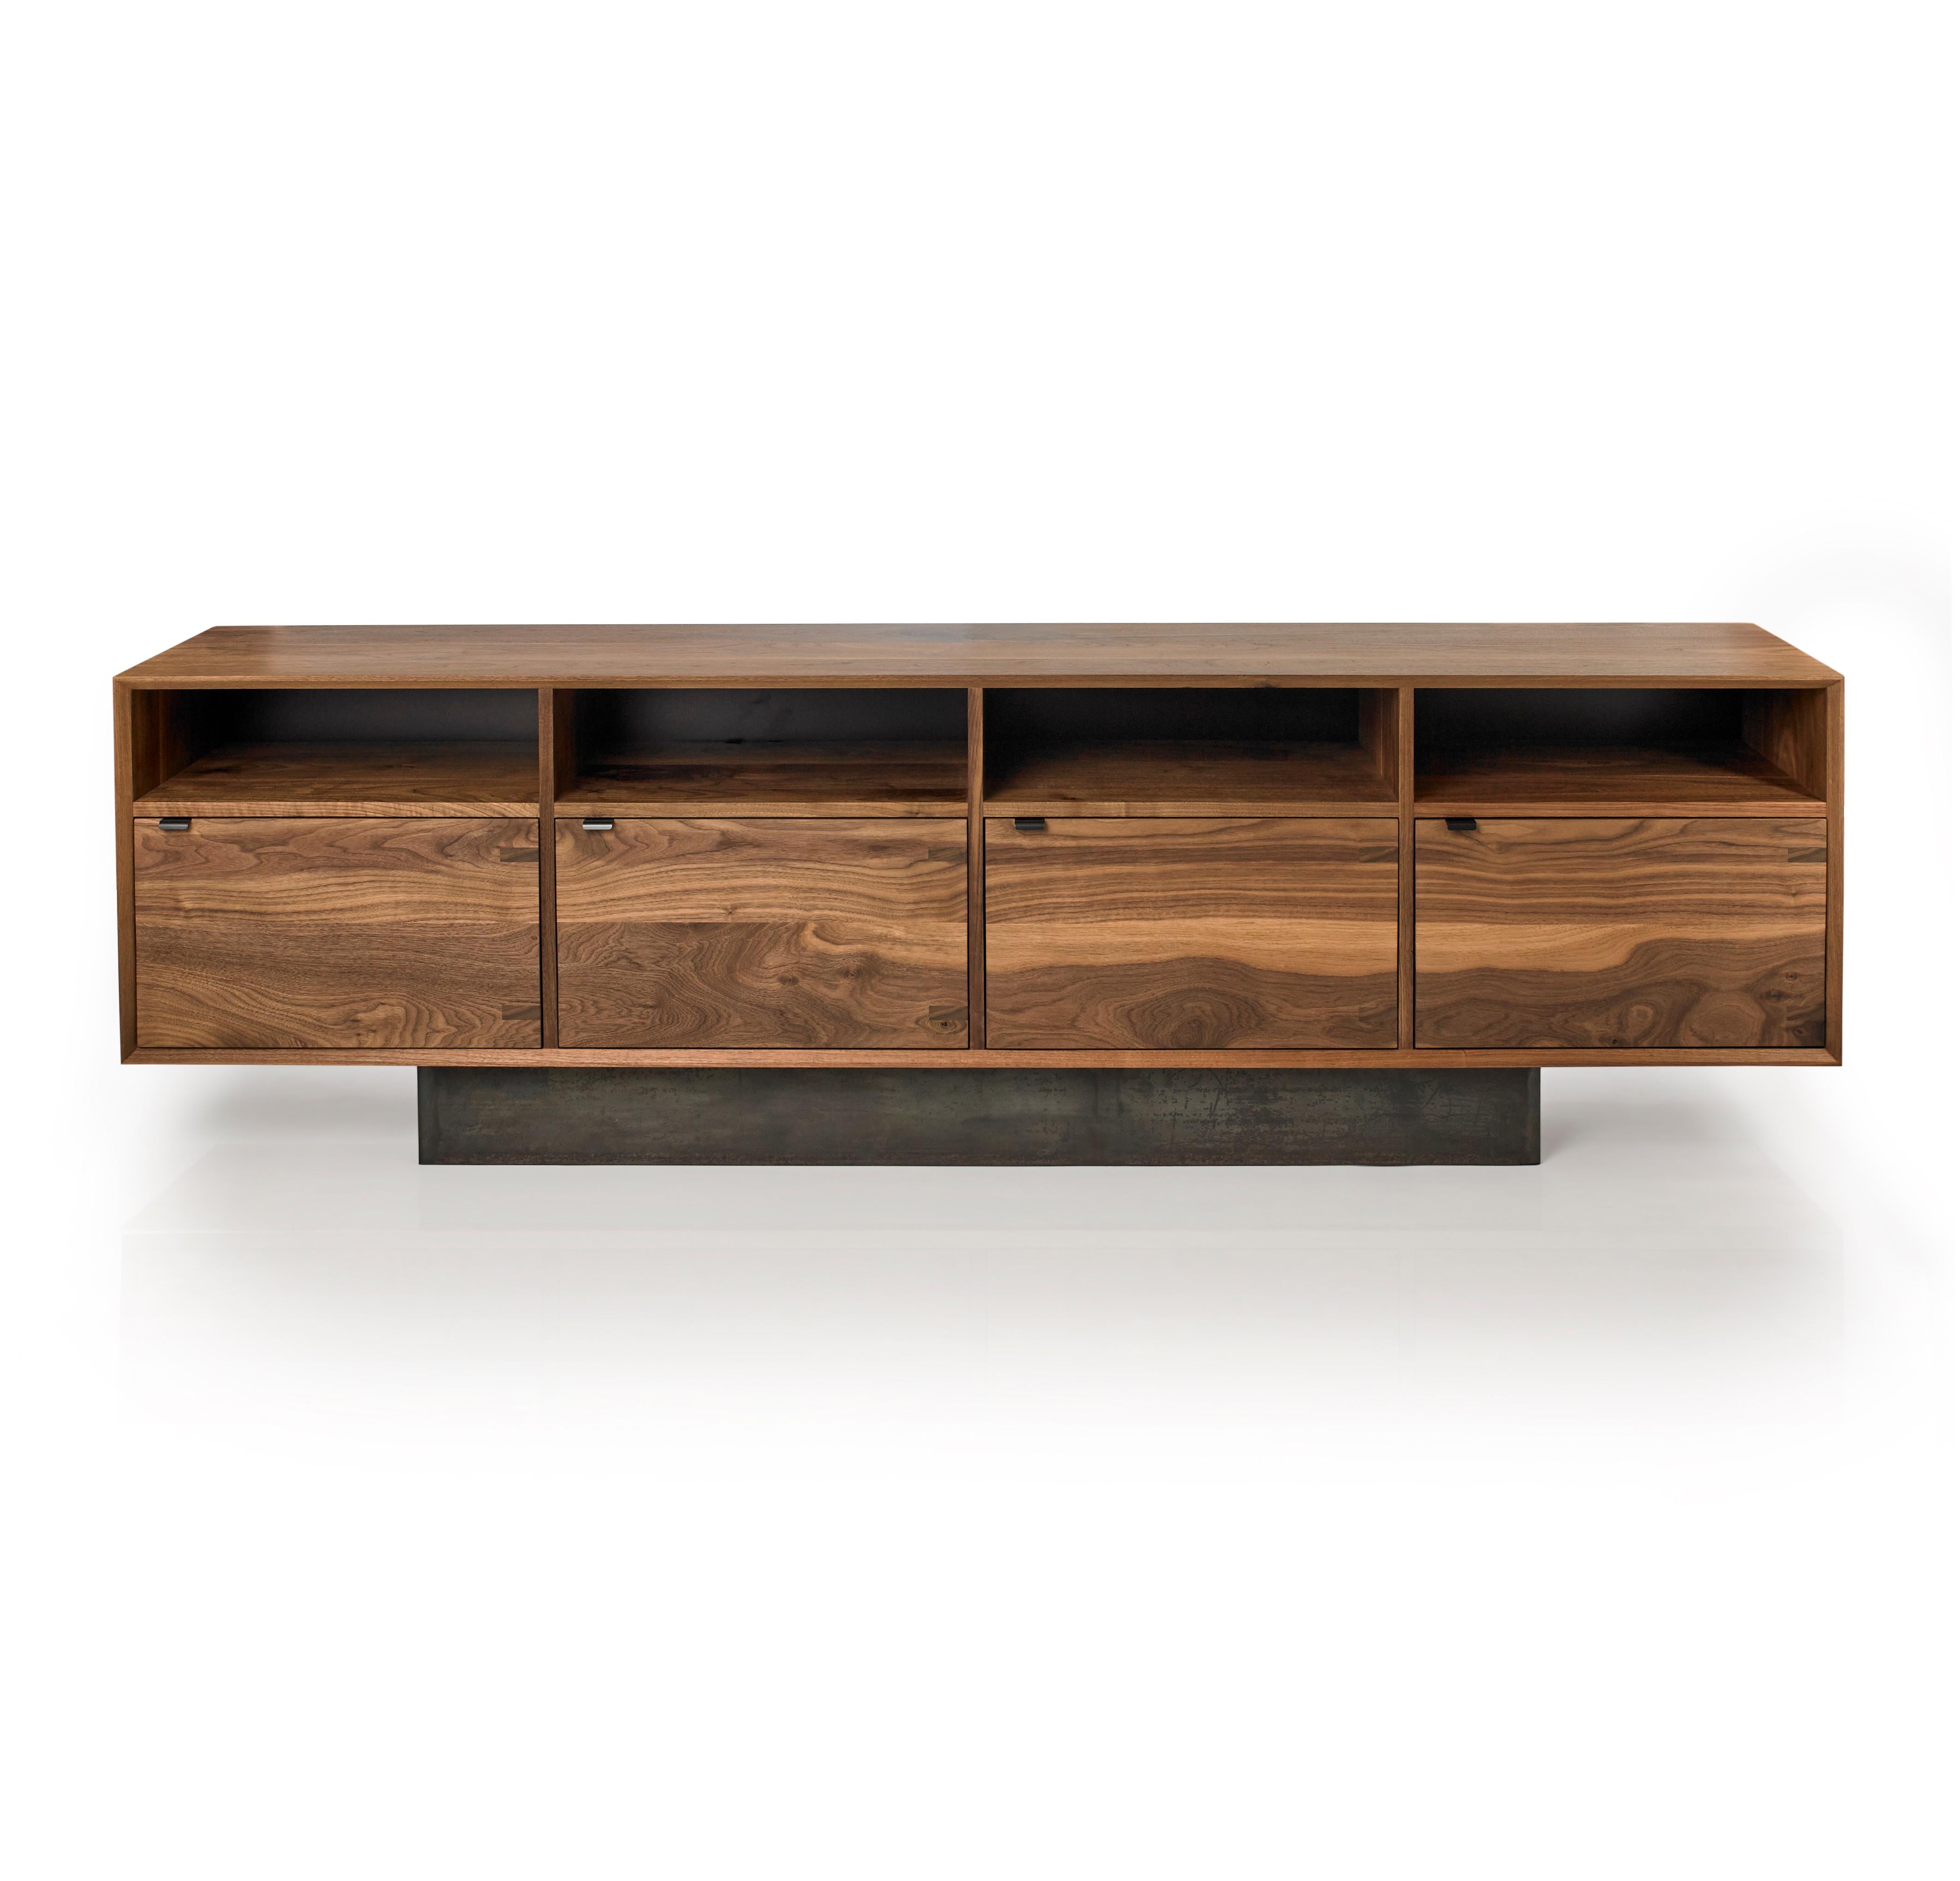 The Baxter Credenza has a low and lean profile, showcasing four cabinet doors and open upper storage. The credenza uses solid black walnut constructed with, an uncommonly practiced, entirely solid wood carcass, cabinet doors, and interior shelves.